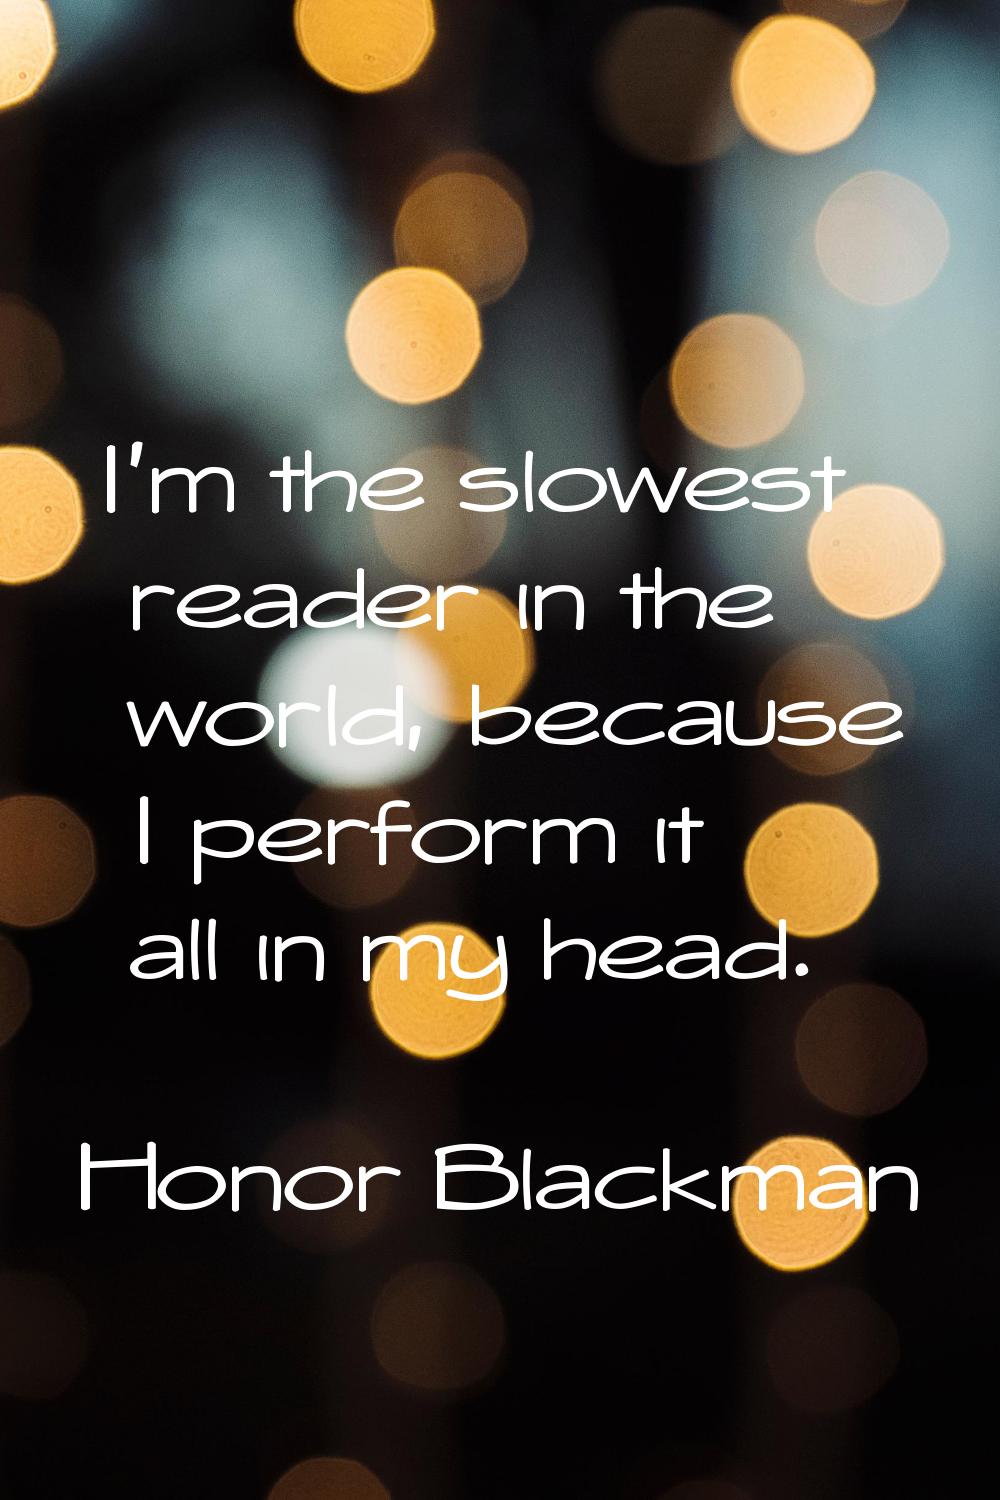 I'm the slowest reader in the world, because I perform it all in my head.